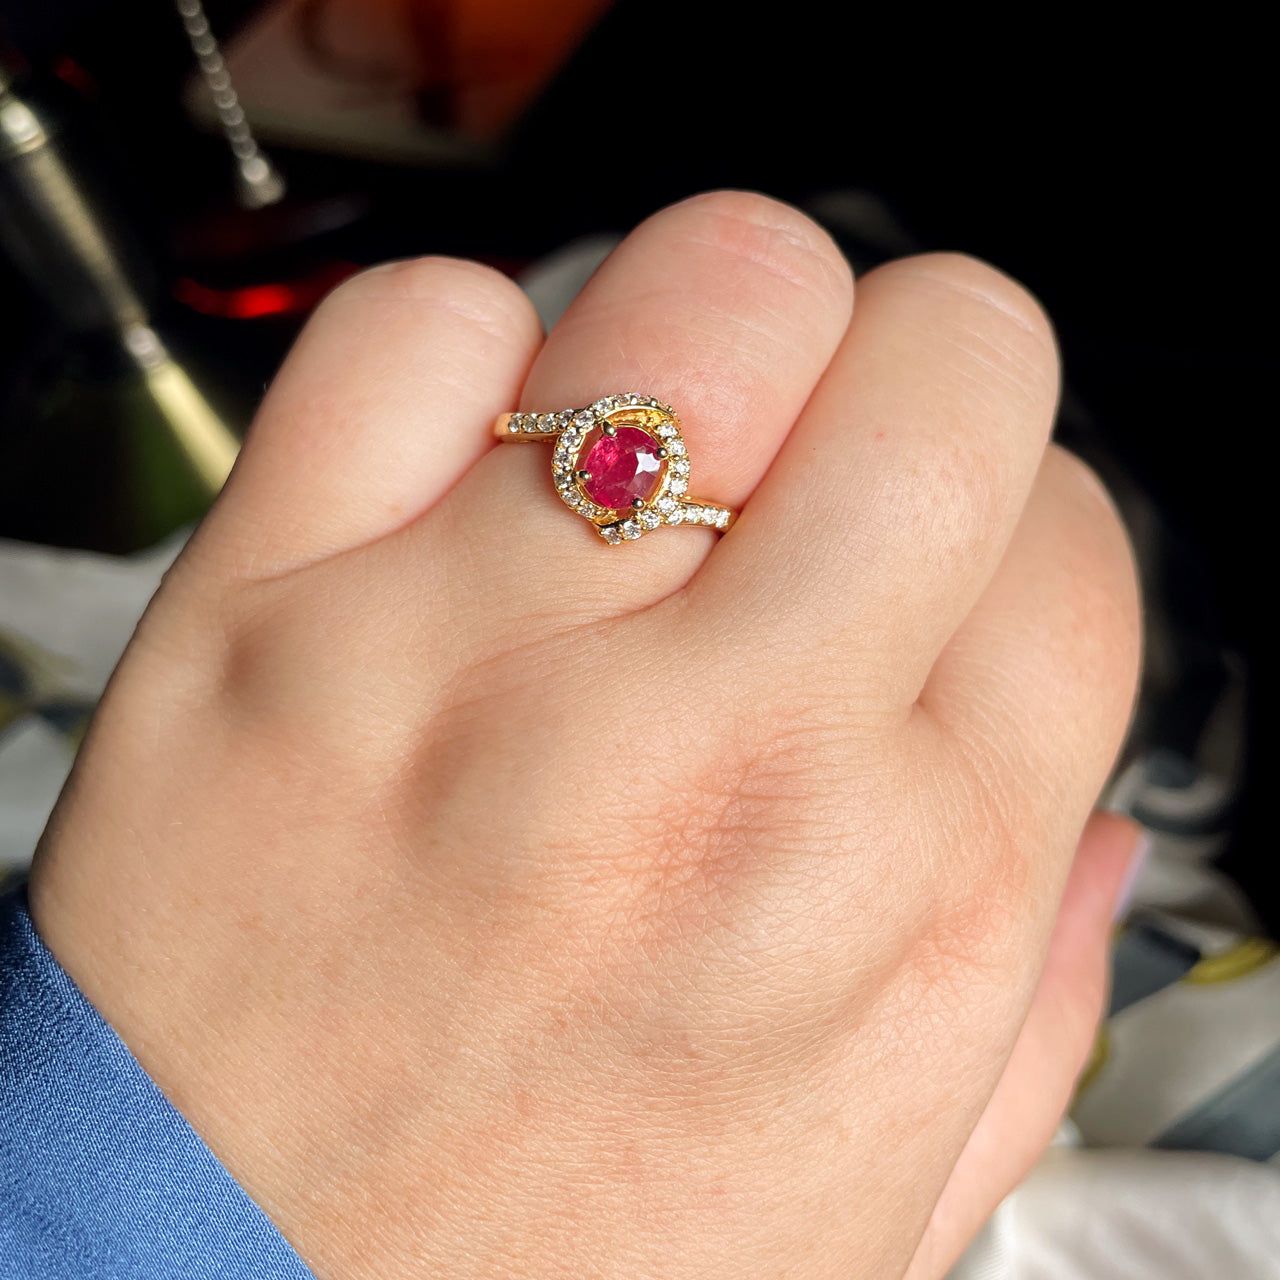 Rare Unheated Natural Ruby 18k Gold Engagement Ring, GIA Certificate - The Alexandrite